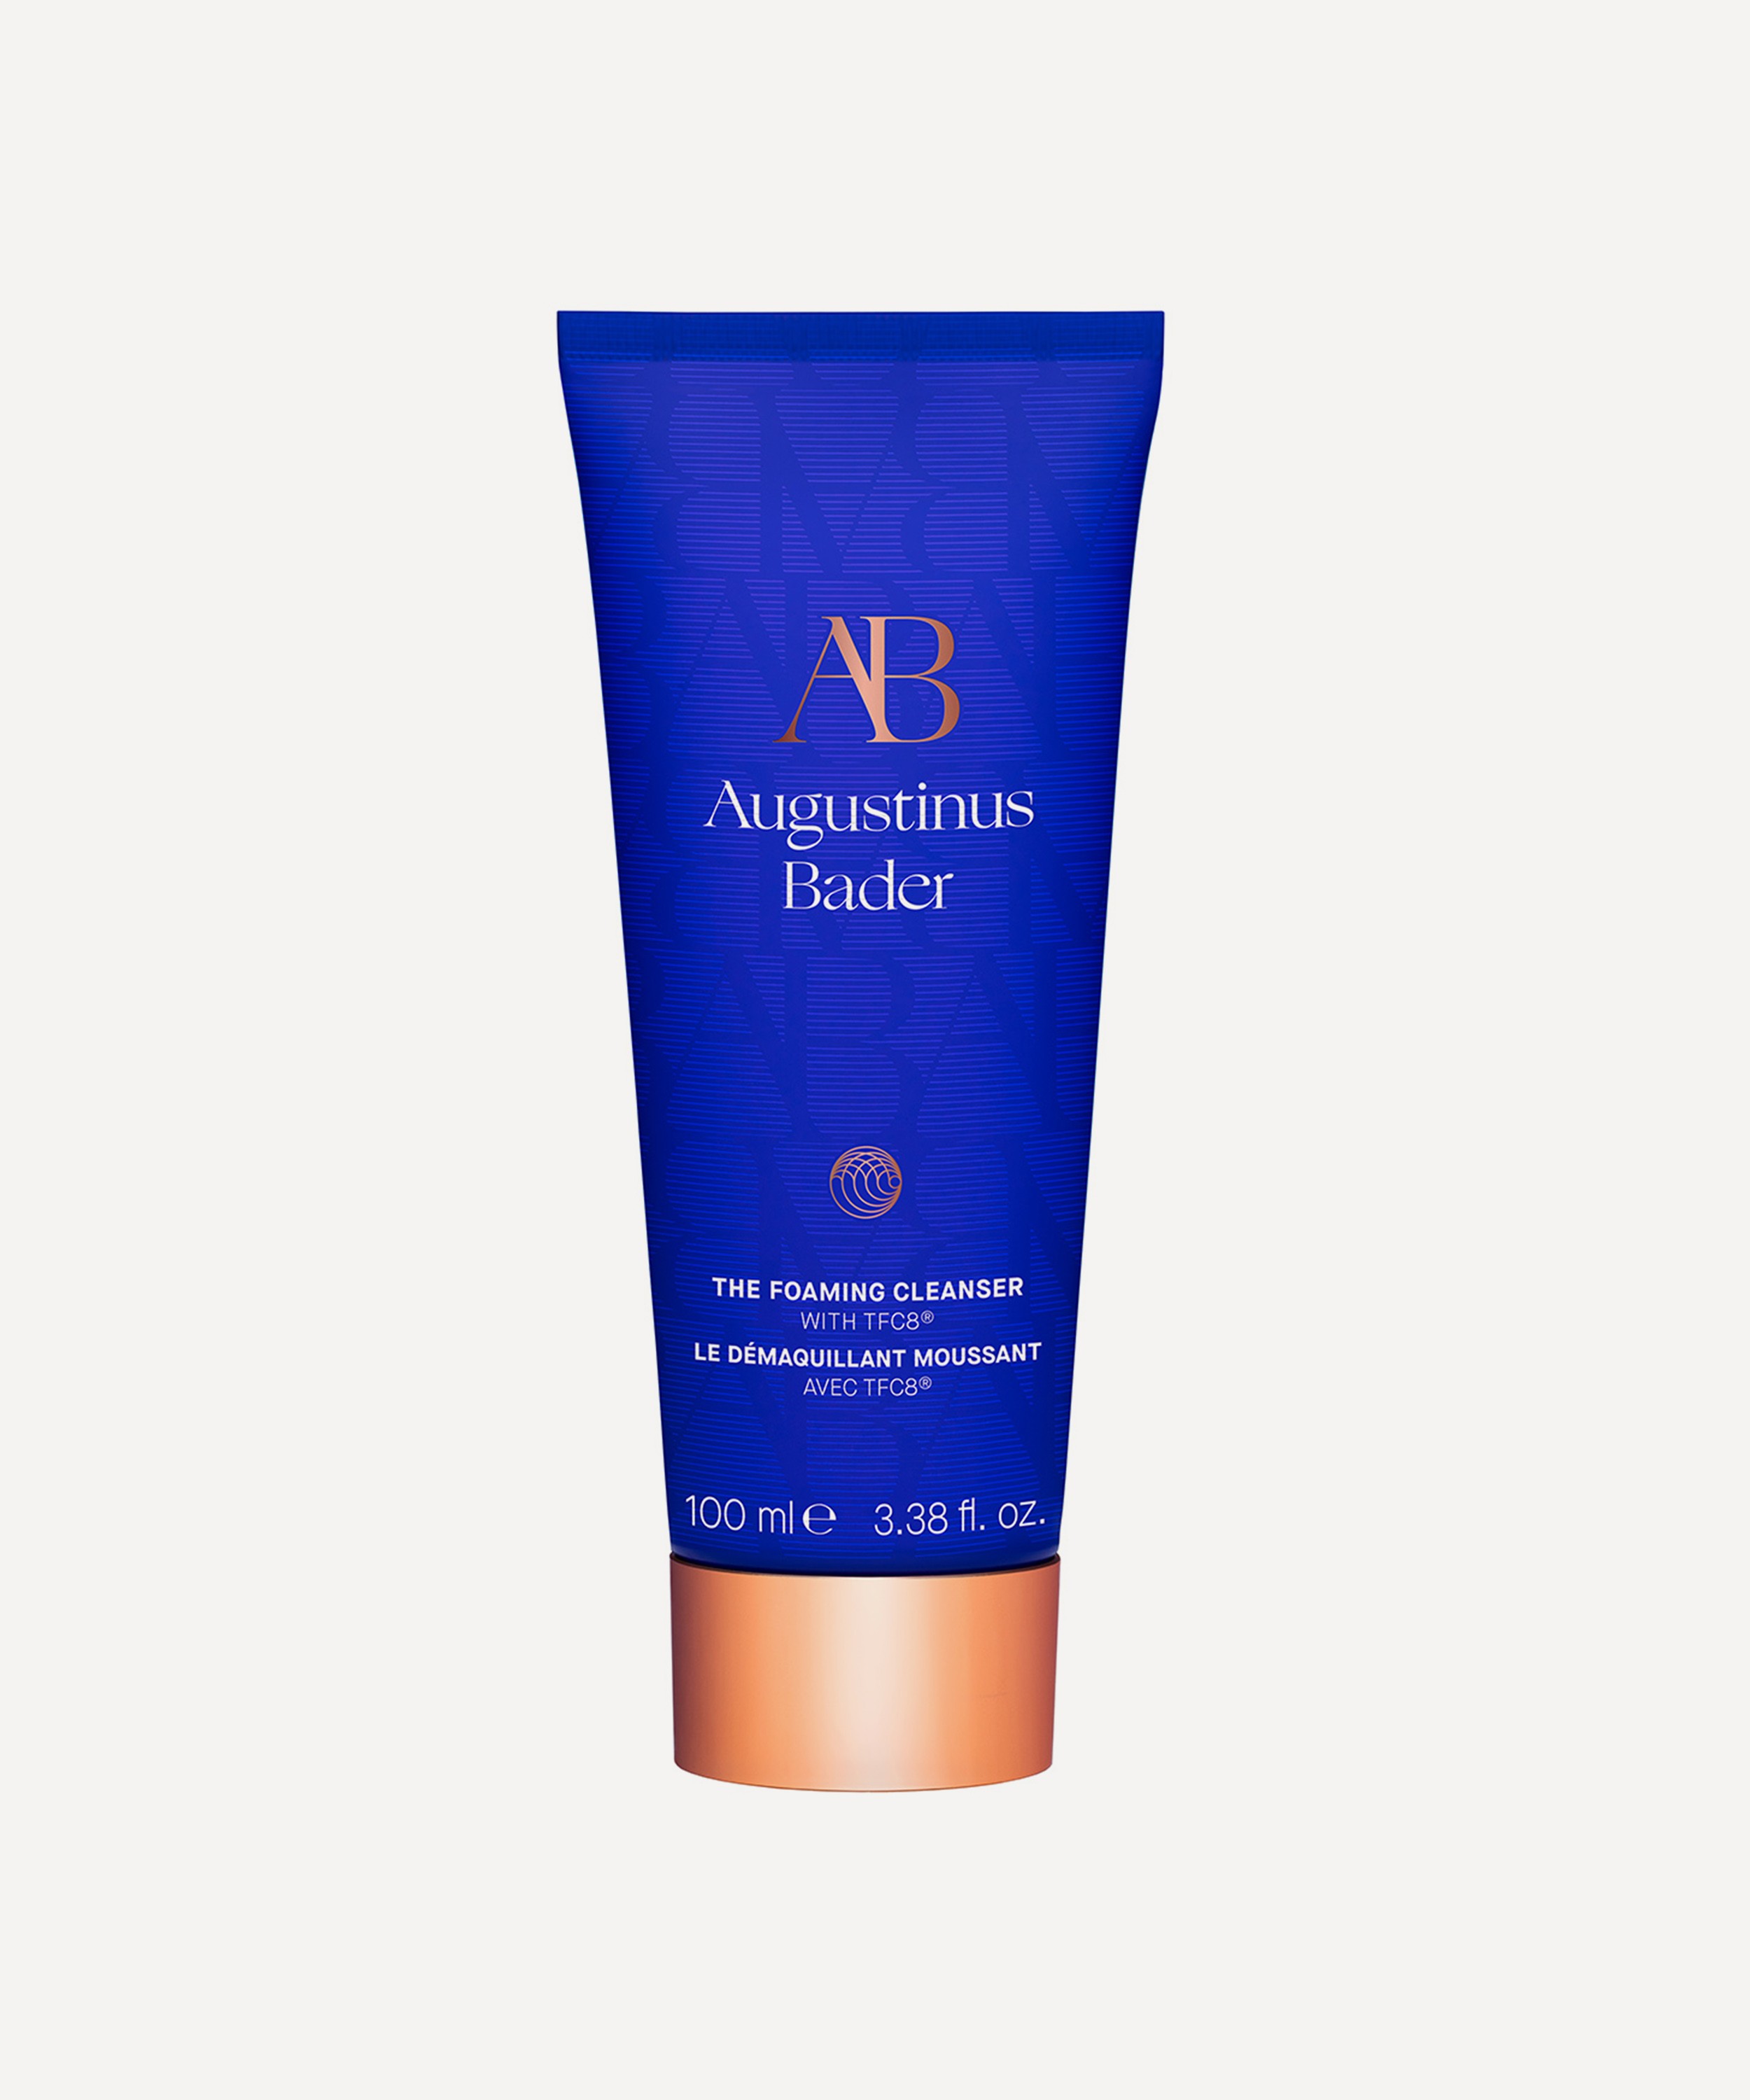 Augustinus Bader - The Foaming Cleanser 100ml